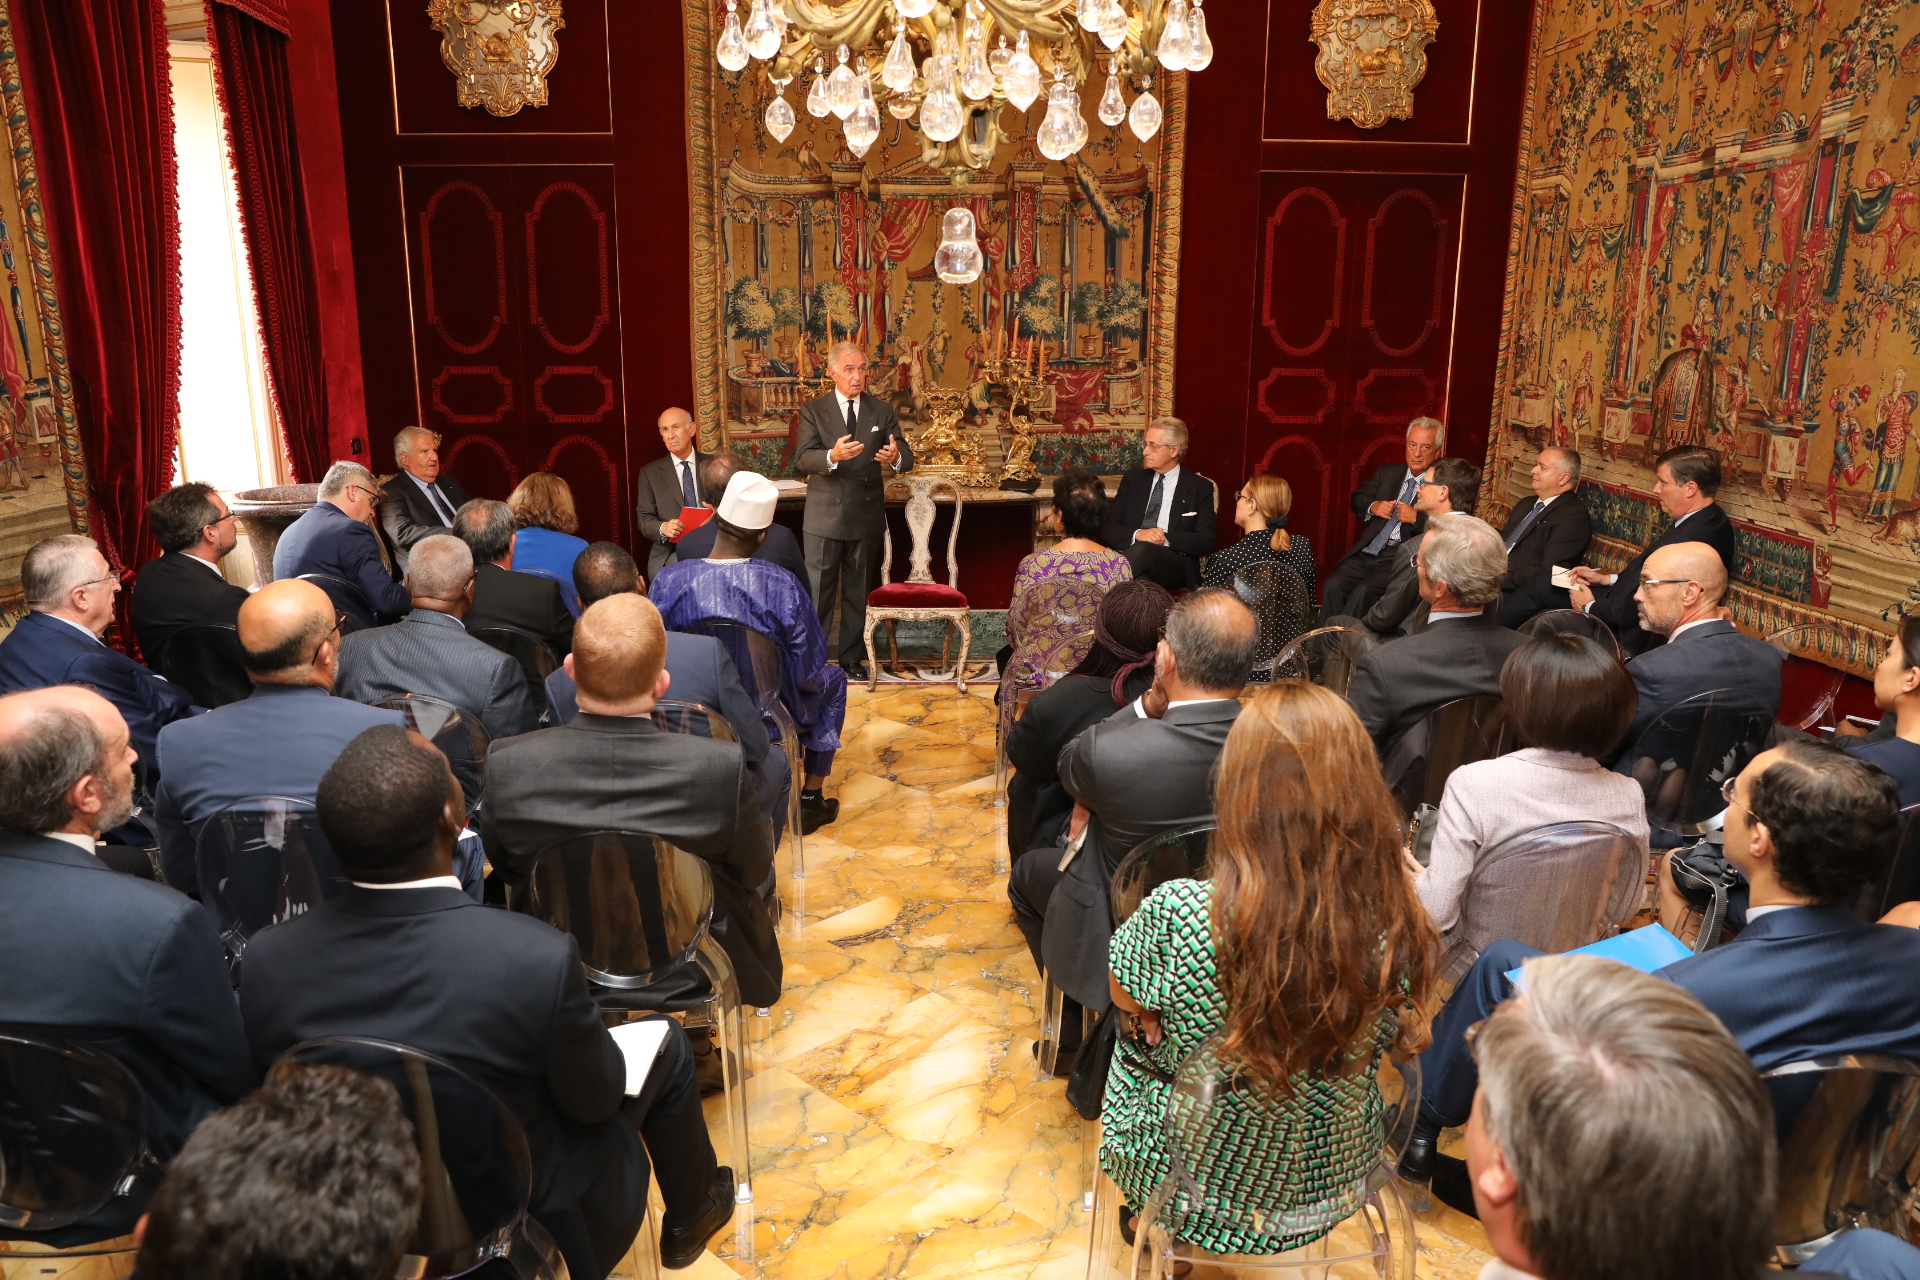 The Grand Chancellor meets the diplomatic corps accredited to the Sovereign Order of Malta